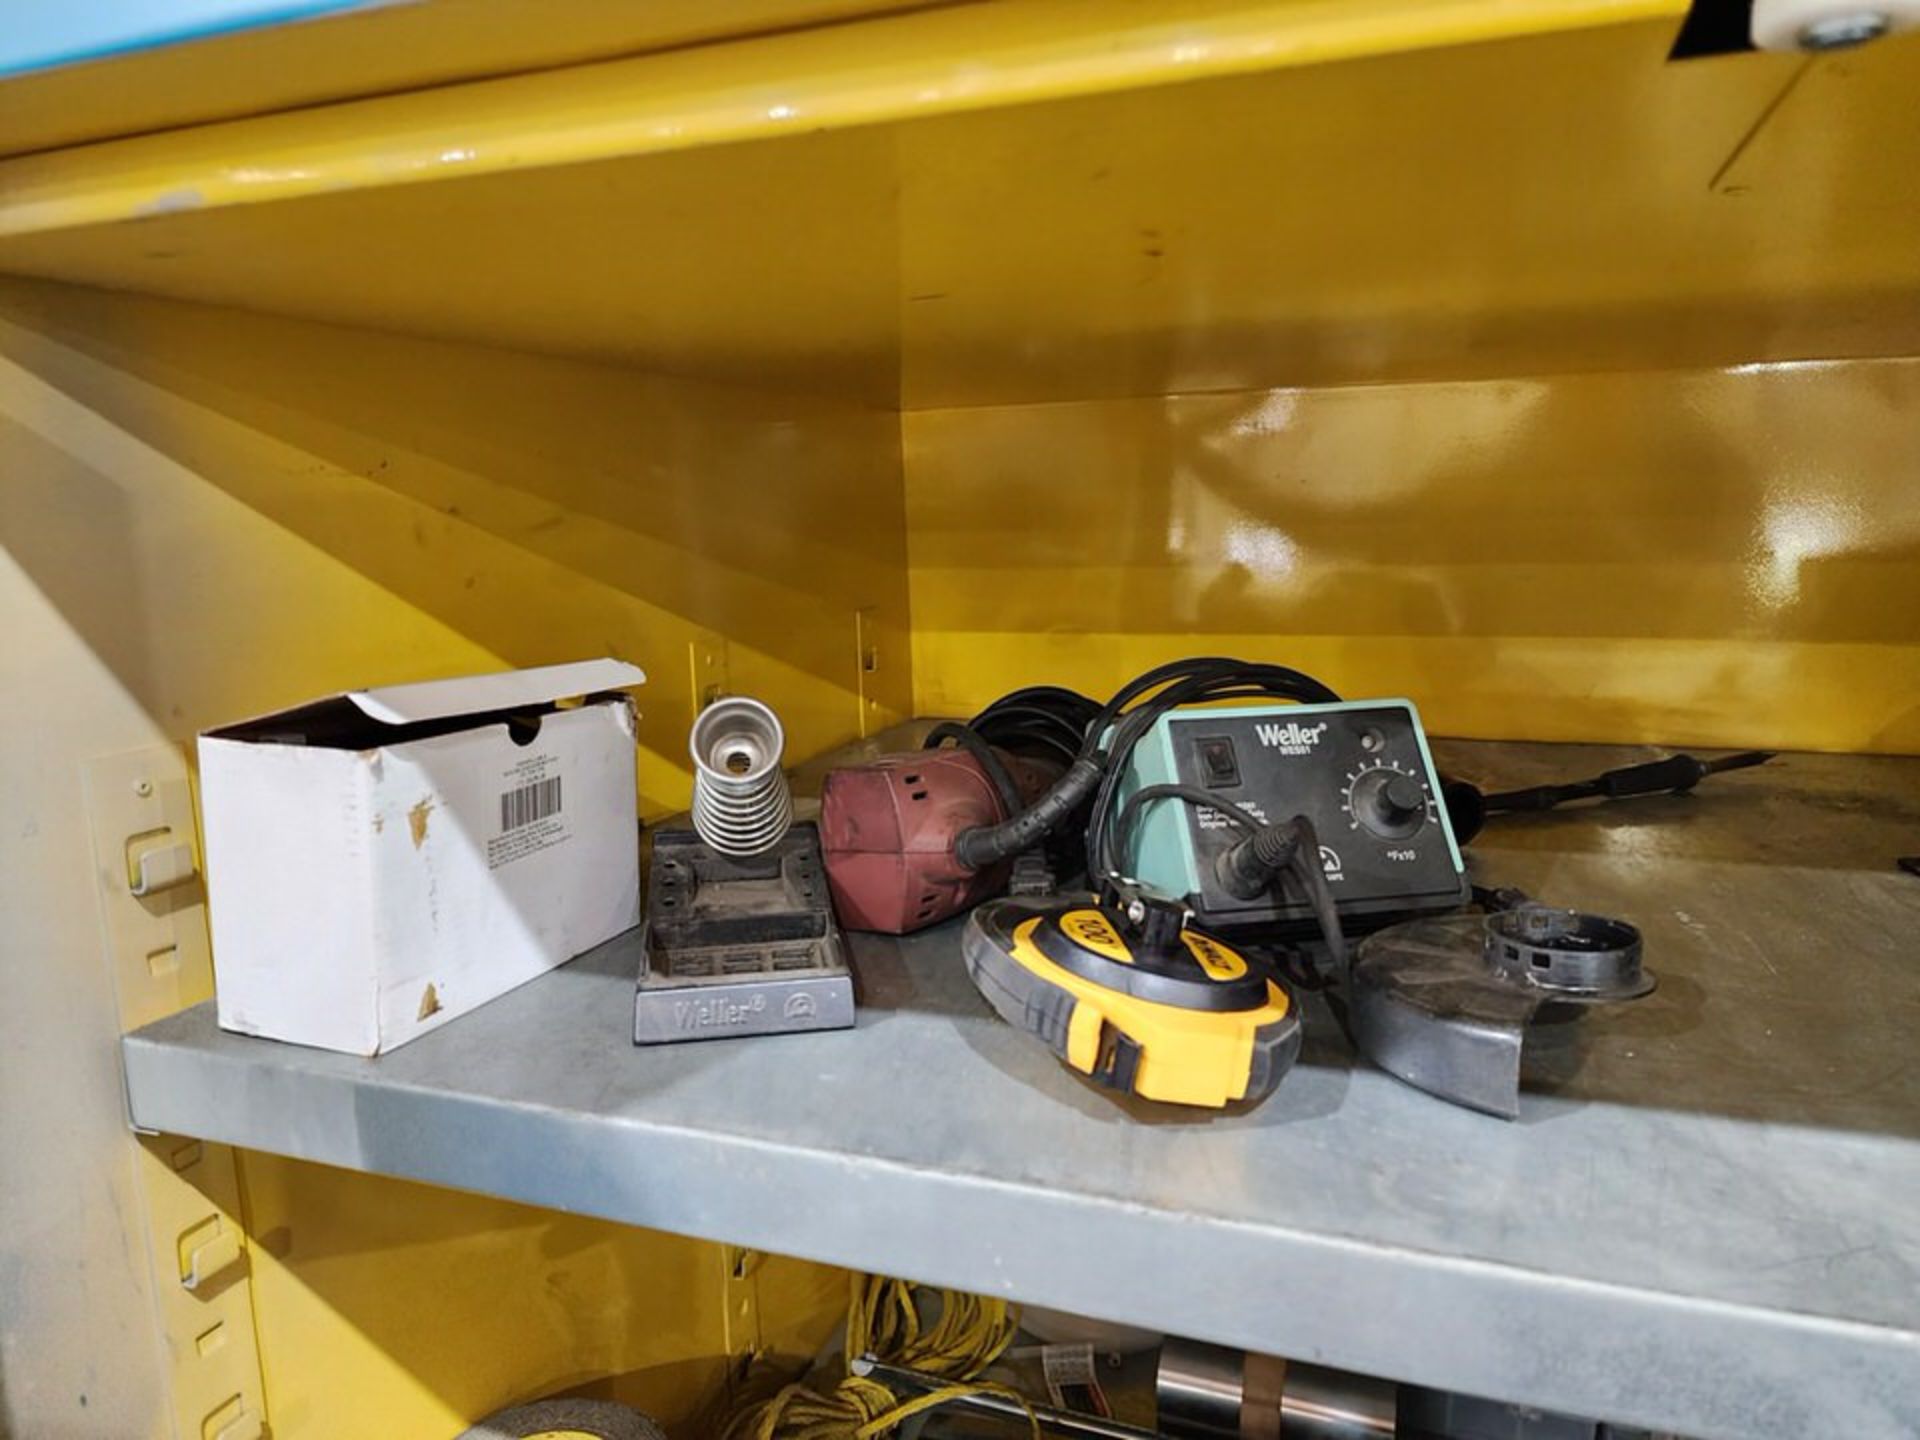 Material Cabinet To Include But Not Limited To: 4-1/2" Angle Grinder; Fllor Jack; Lifting Equipment; - Image 7 of 25